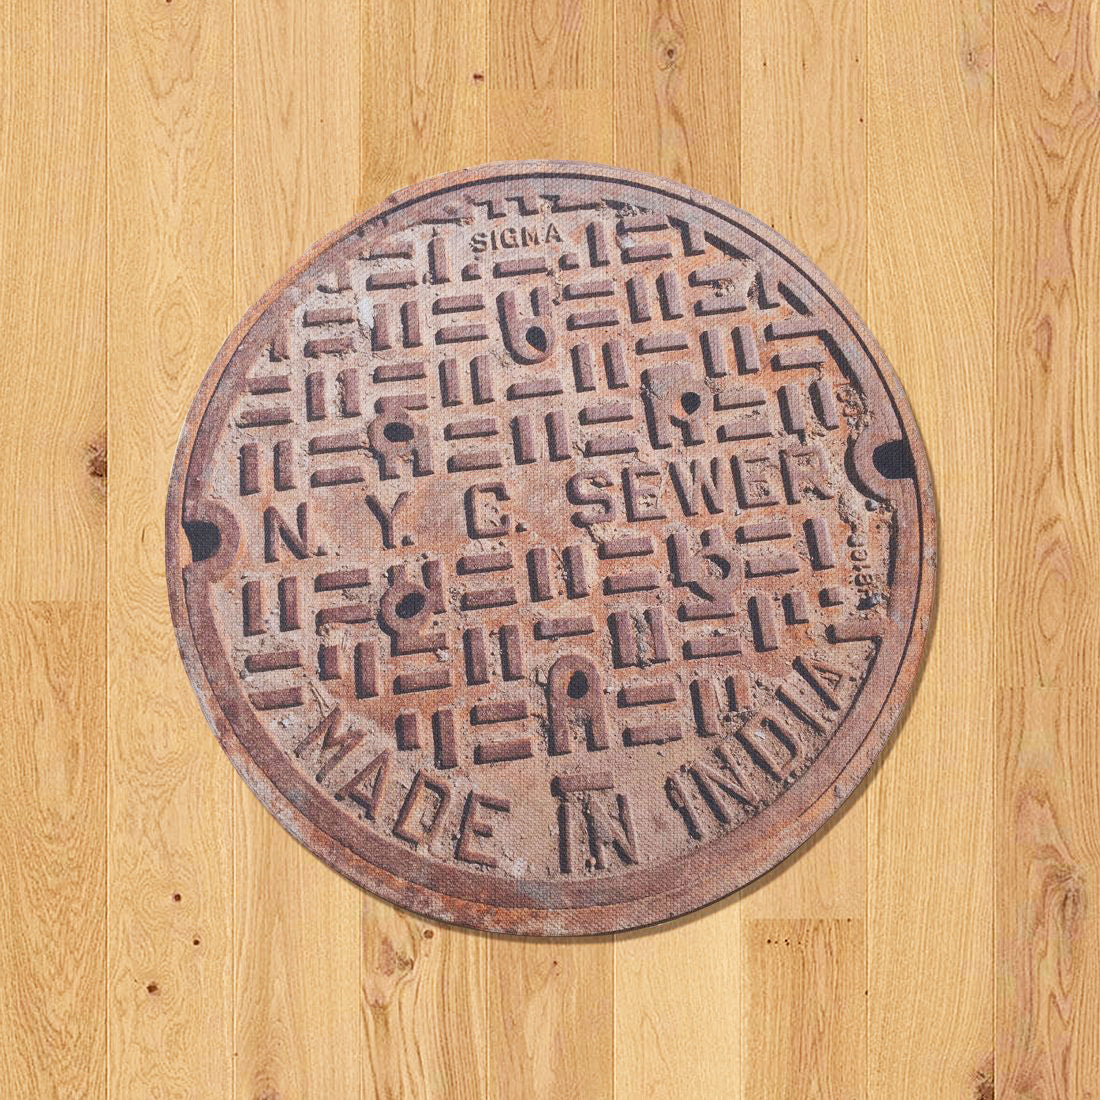 NYC SERIES - Sewer Cover Doormat, Trivet, Coaster - Made in India - New York, NY